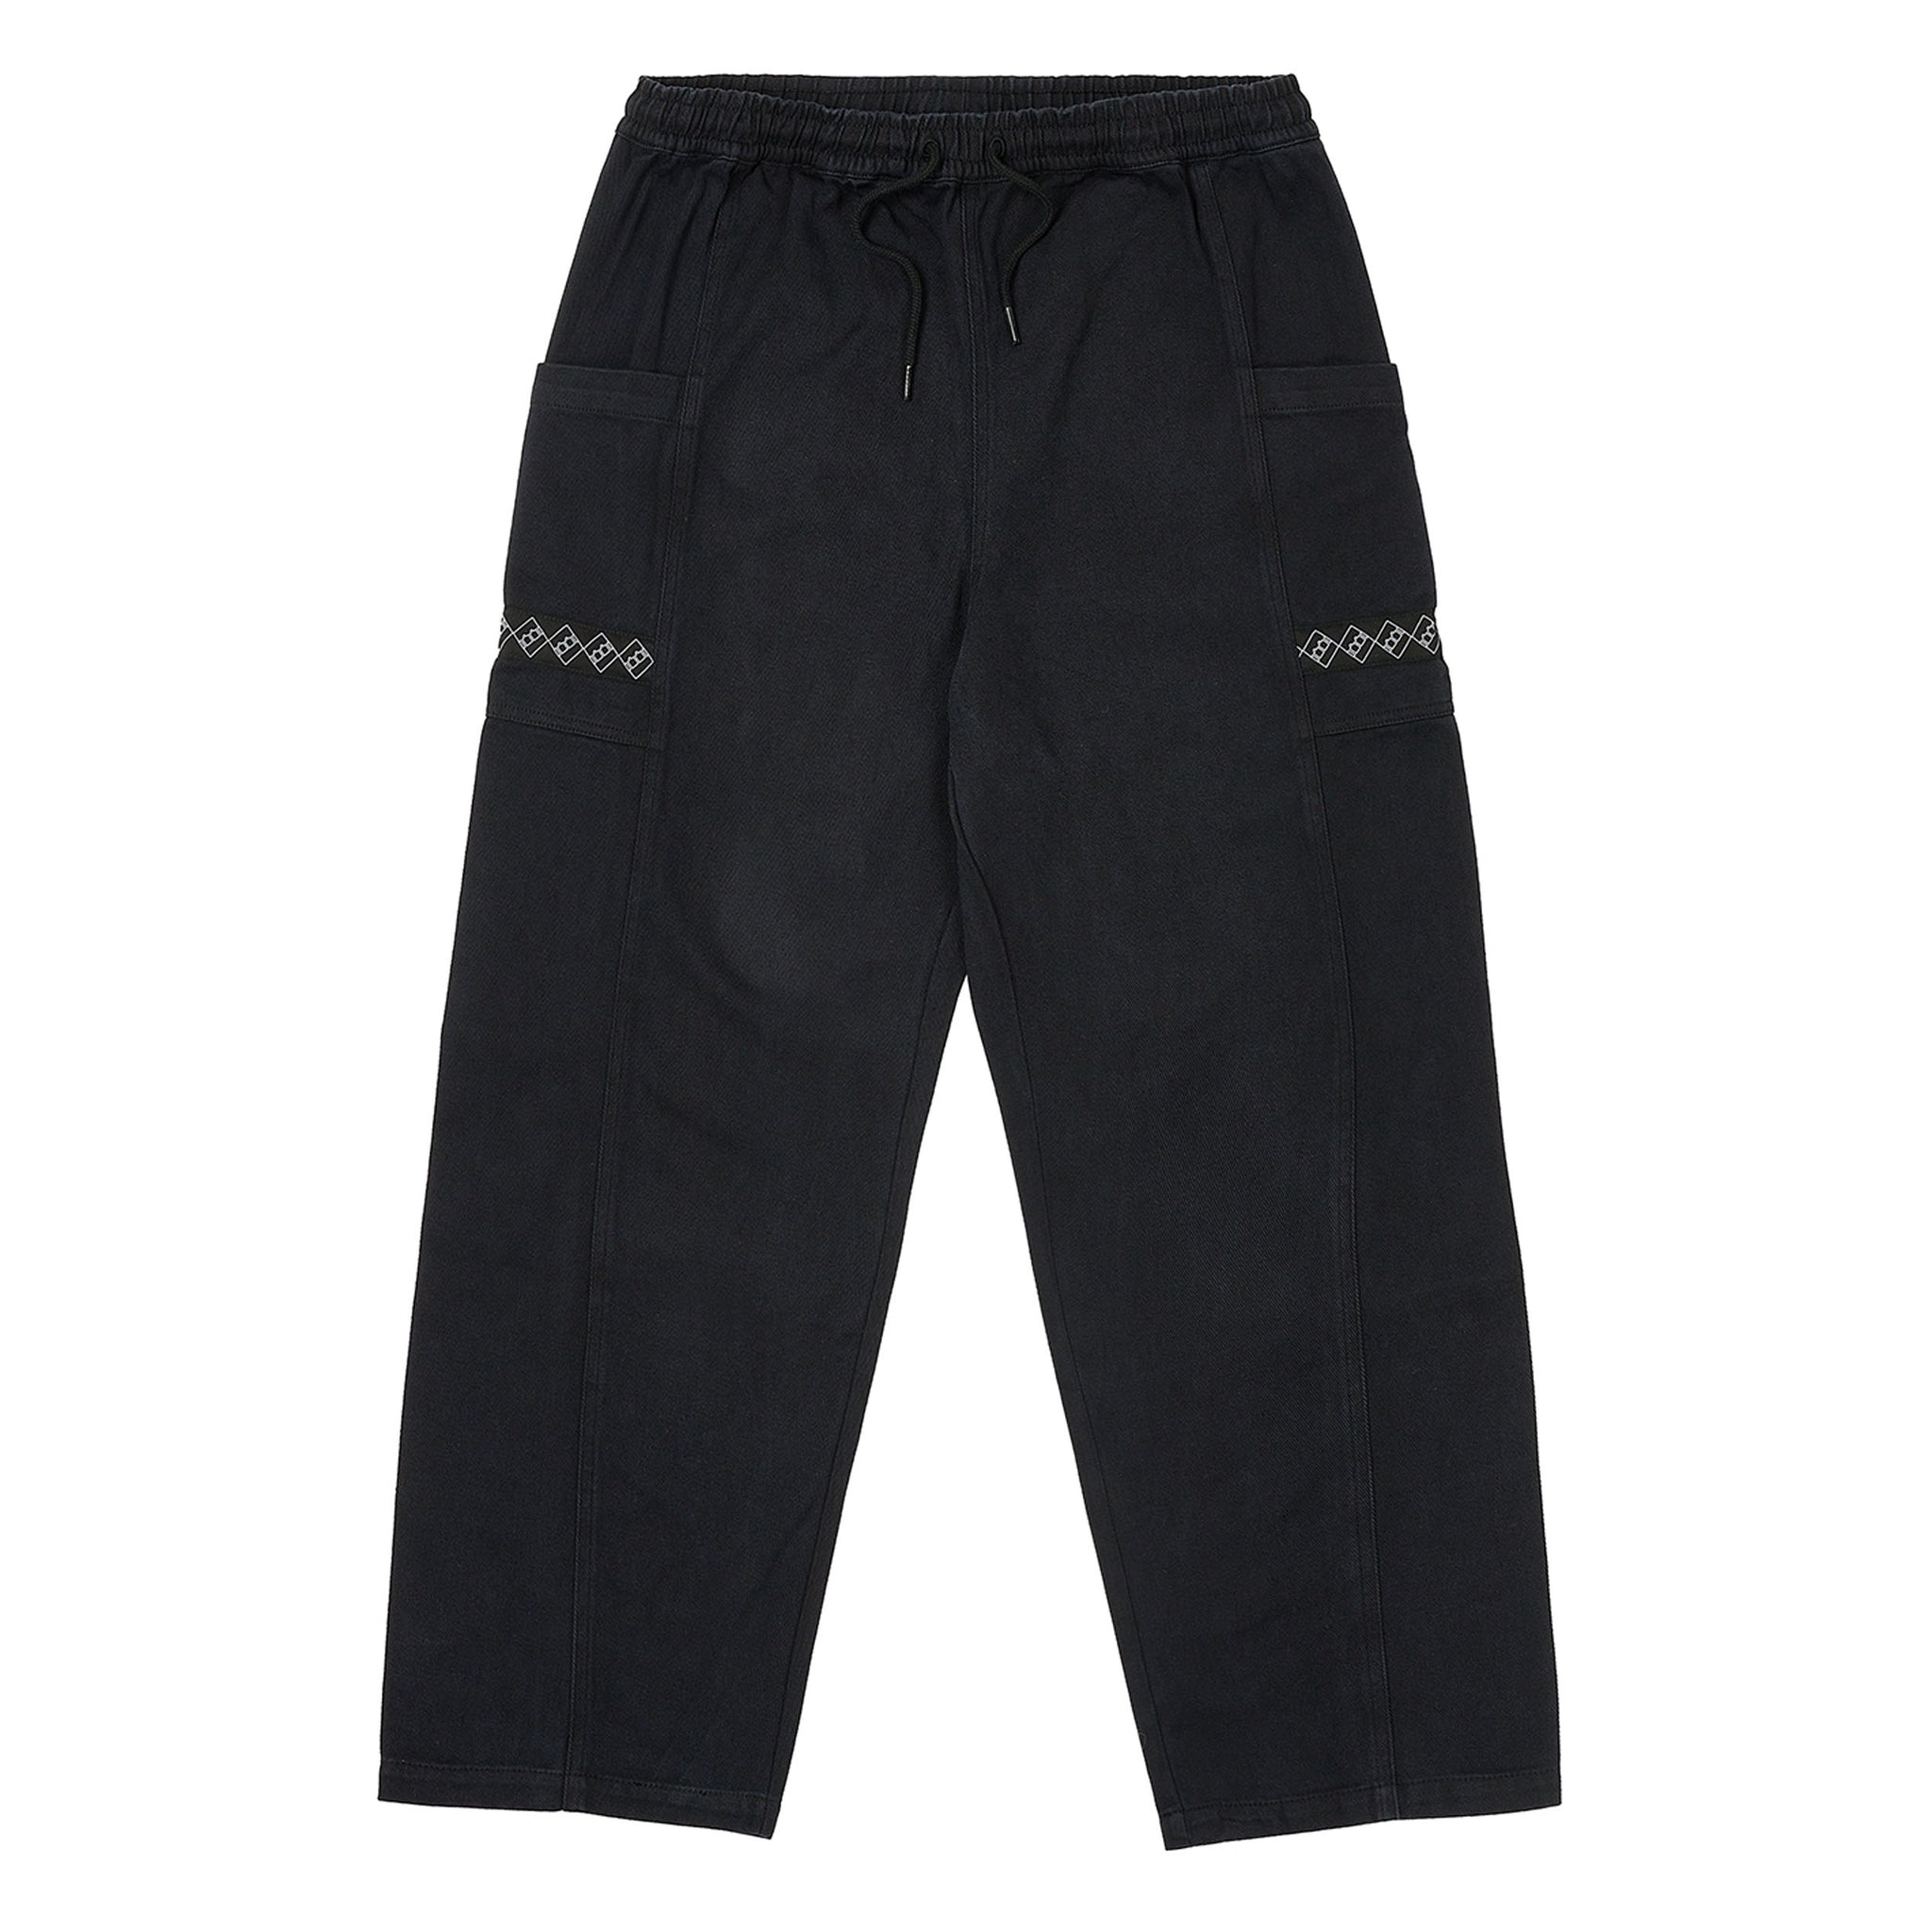 The Trilogy Tapes Tape Pocket Trousers